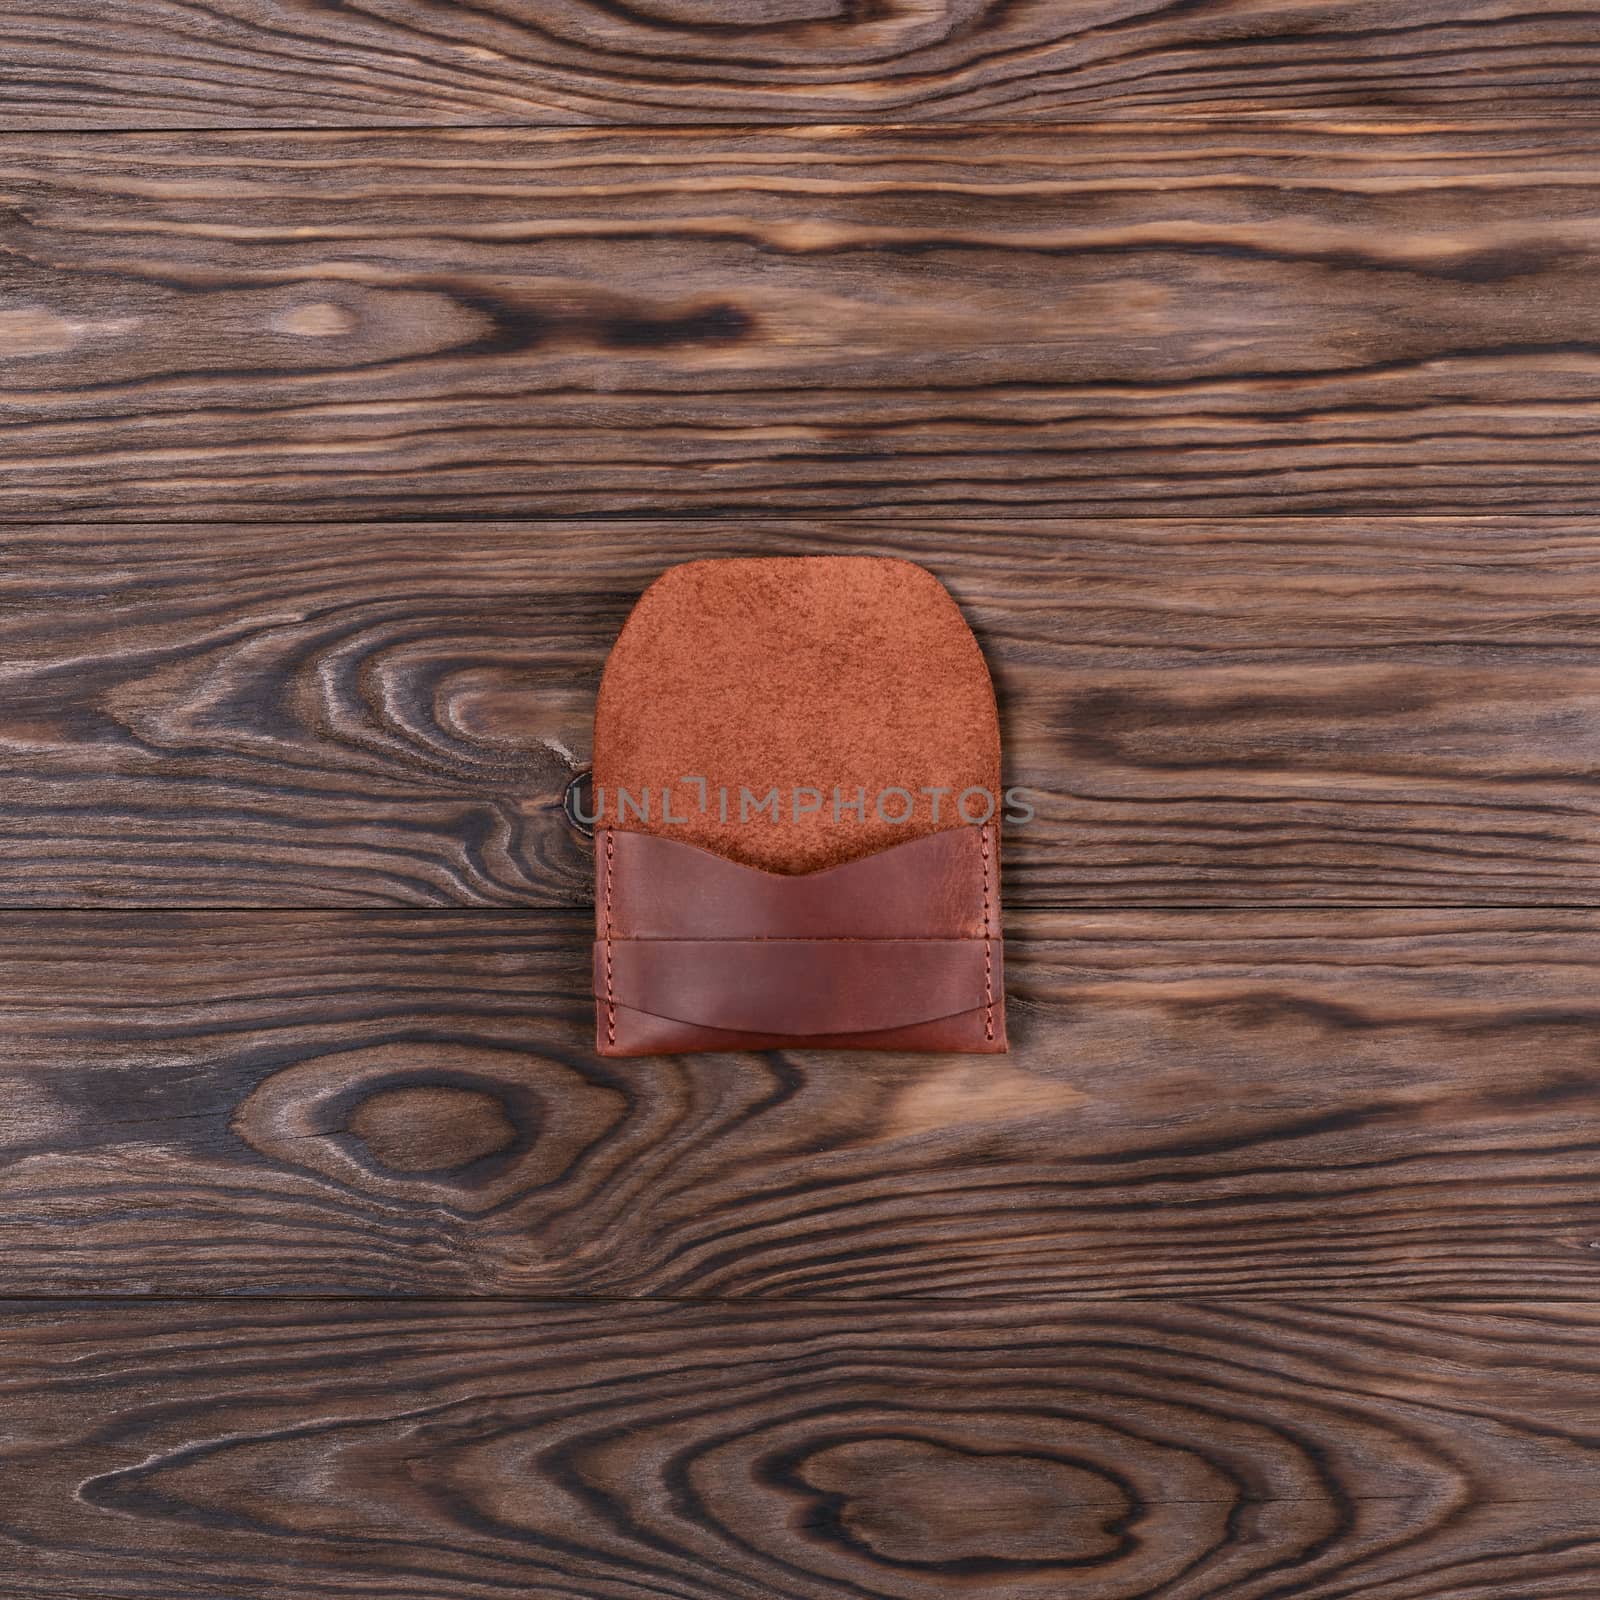 Flat lay photo of ginger colour handmade leather one pocket cardholder. Stock photo on wooden background.